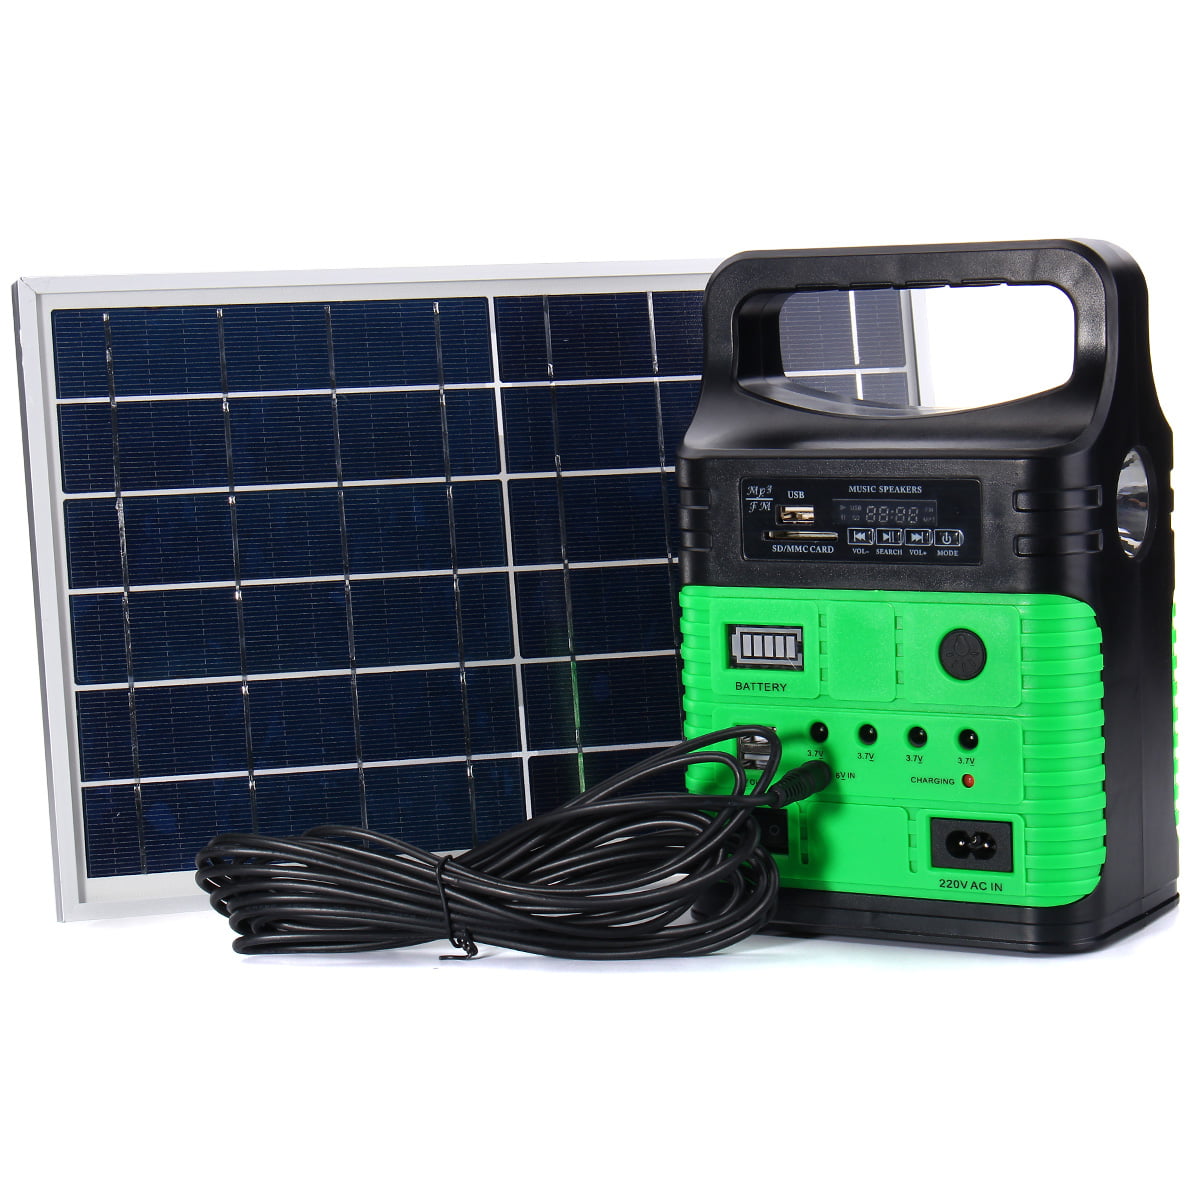 UPEOR Solar Generator Lighting System Portable Solar Power Generator Kit for Emergency Power Supply,Home & Outdoor Camping,Including MP3&FM Radio,Solar Panel,3 Sets LED Lights Yellow 